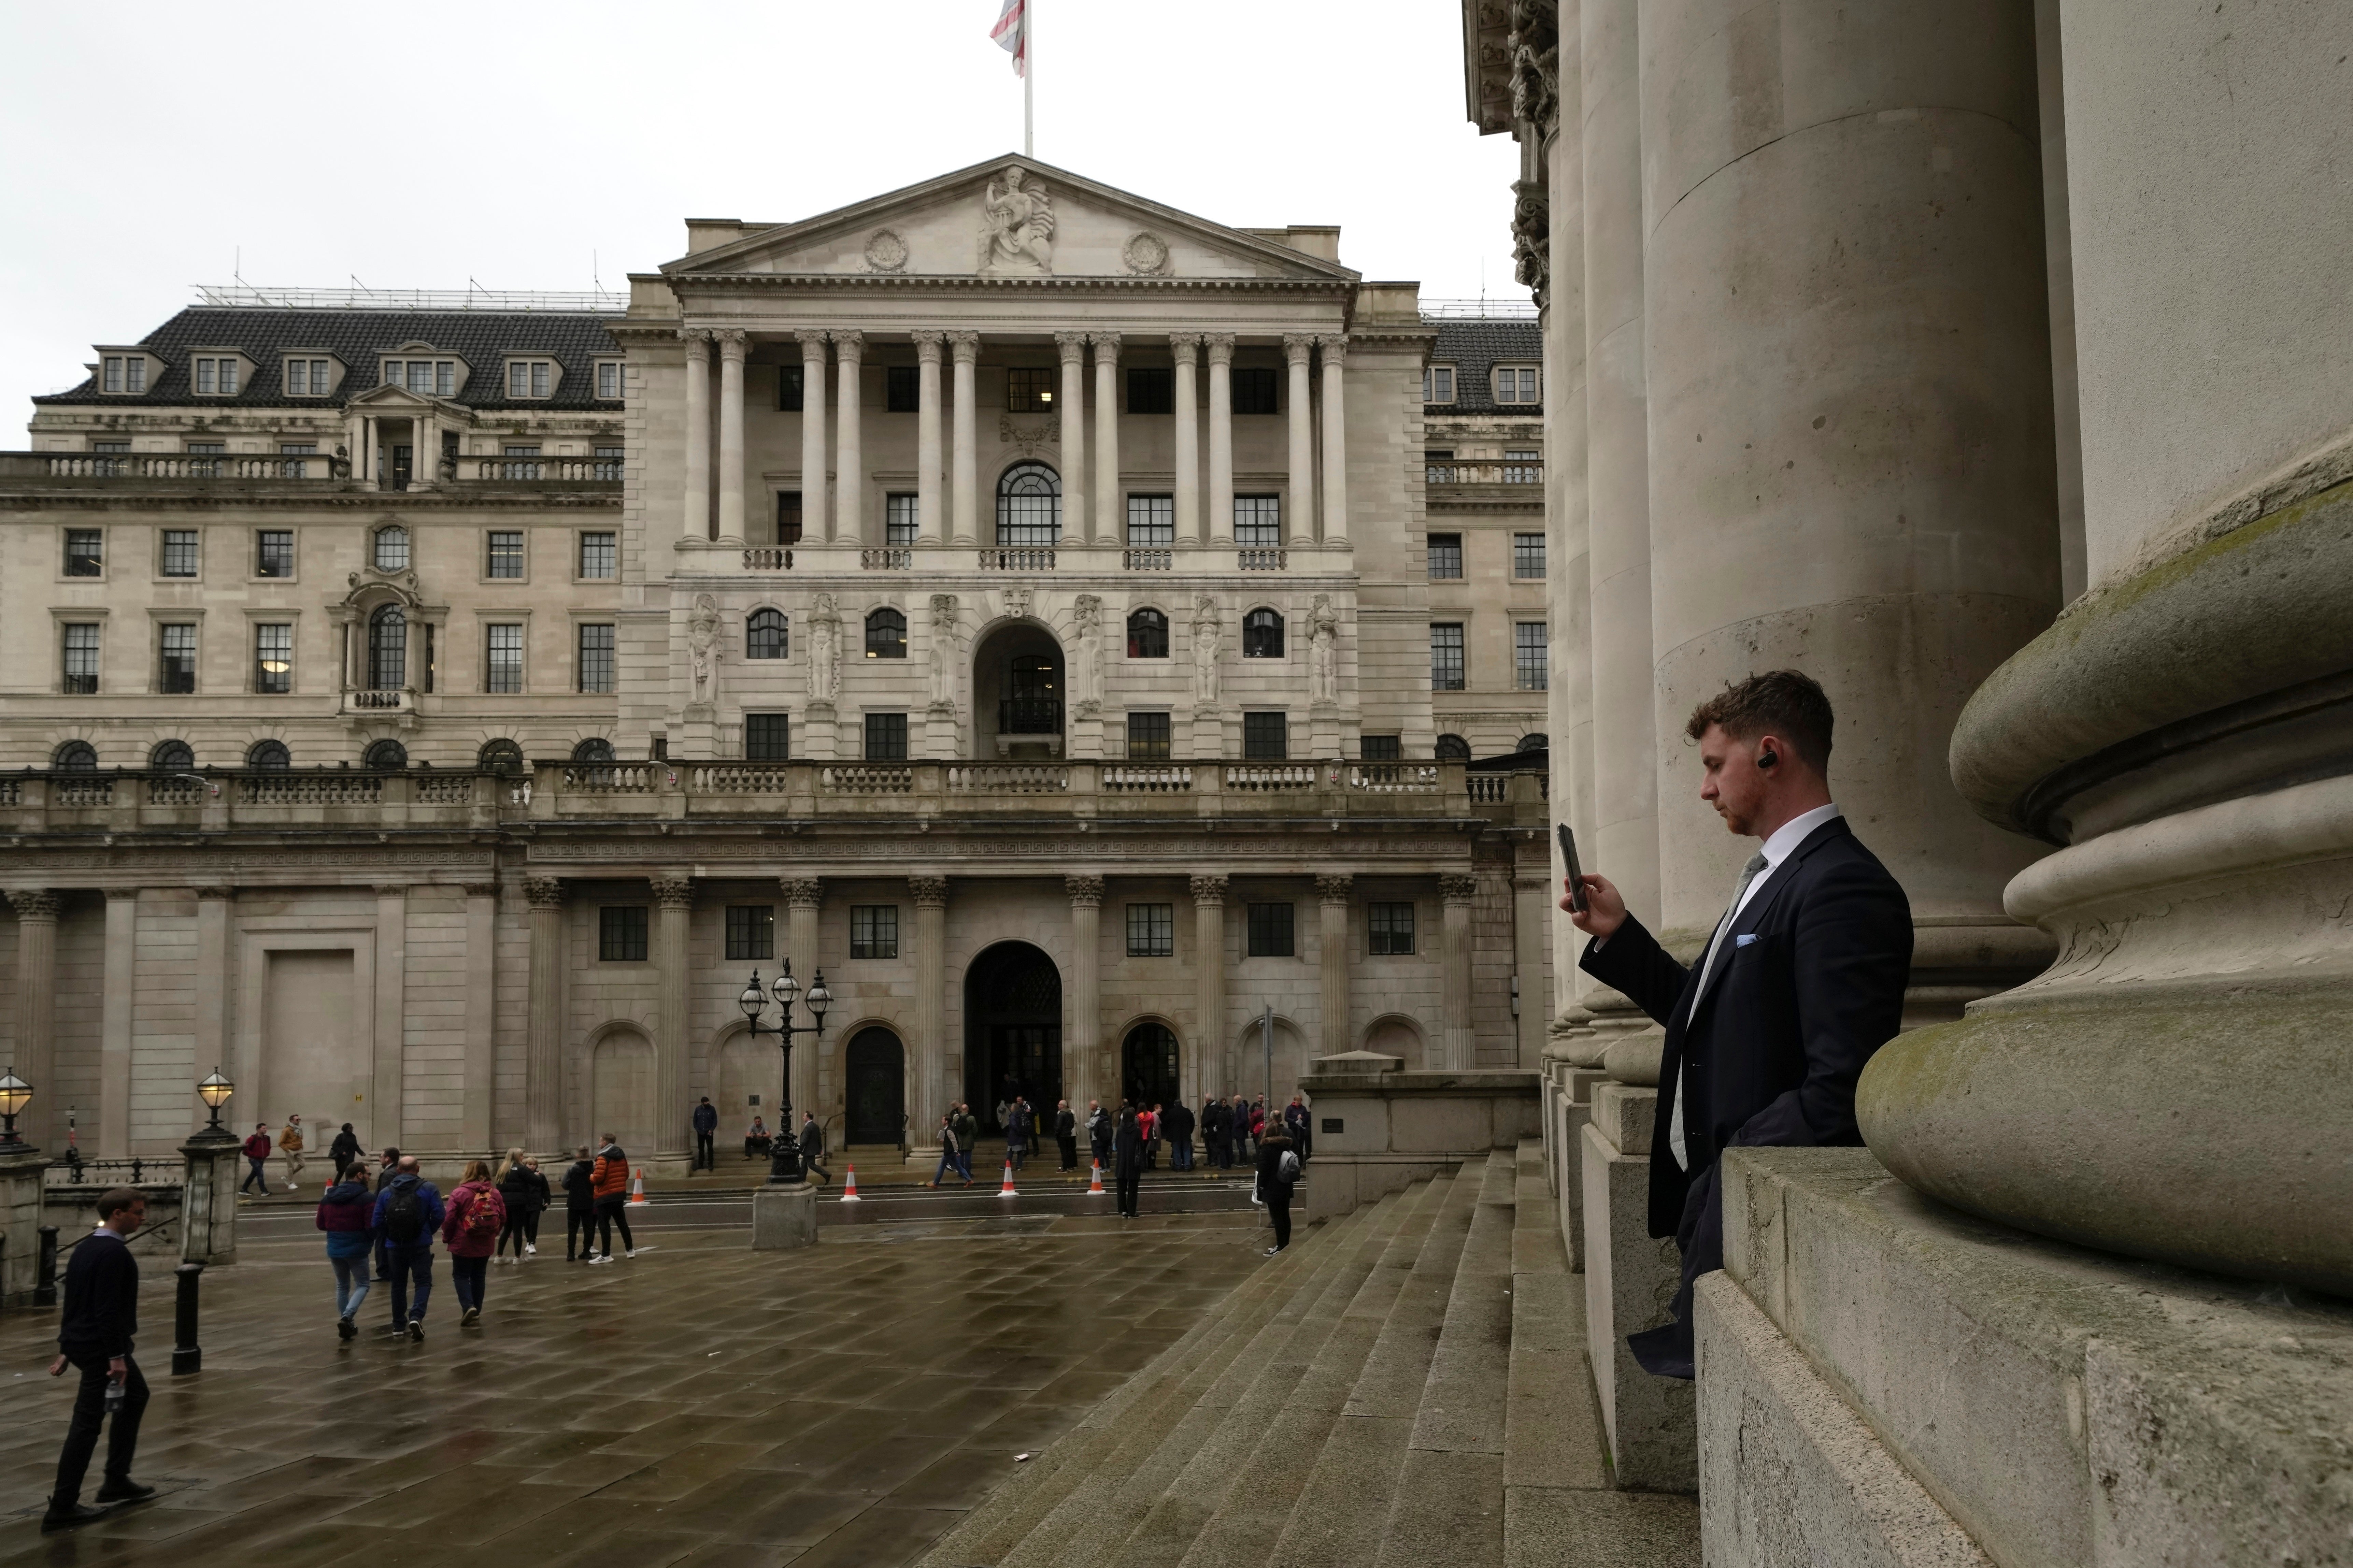 The Bank of England is responsible for prudential financial regulation